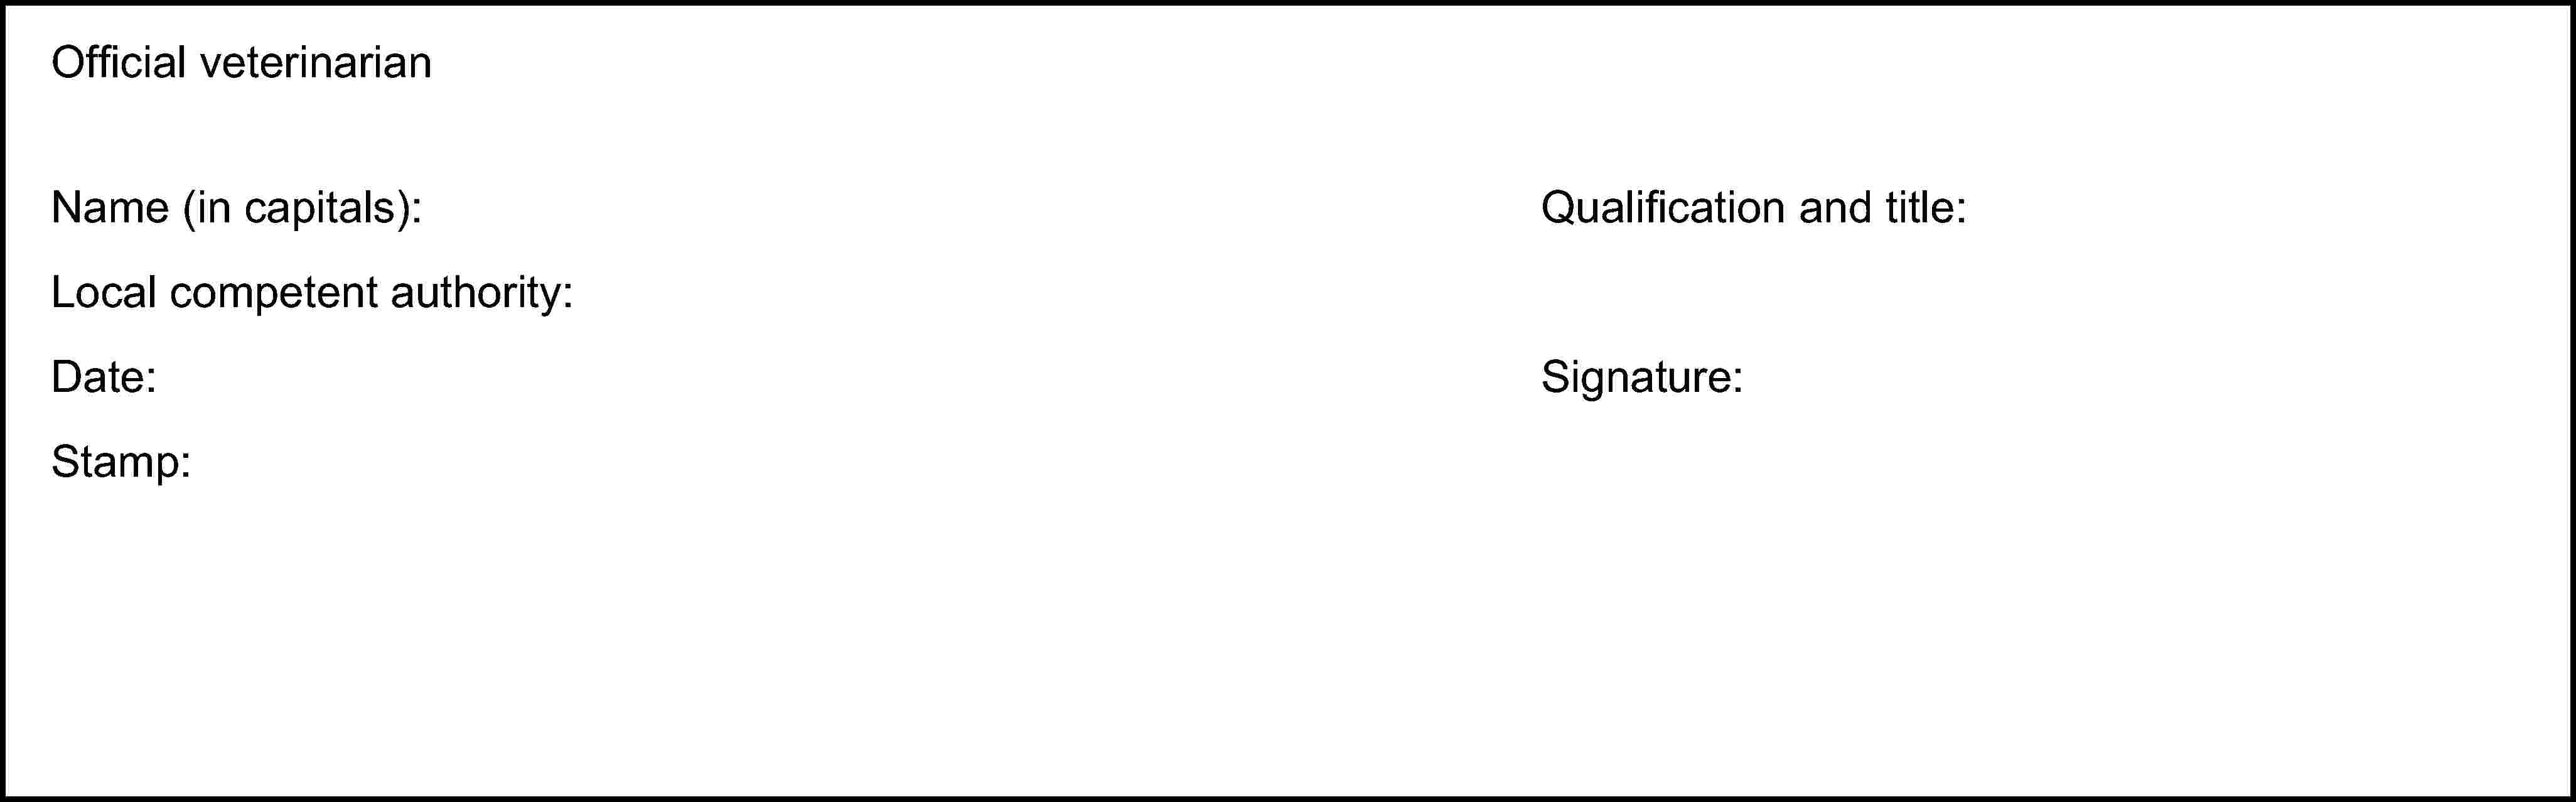 Official veterinarianName (in capitals):Local competent authority:Date:Stamp:Qualification and title:Signature: